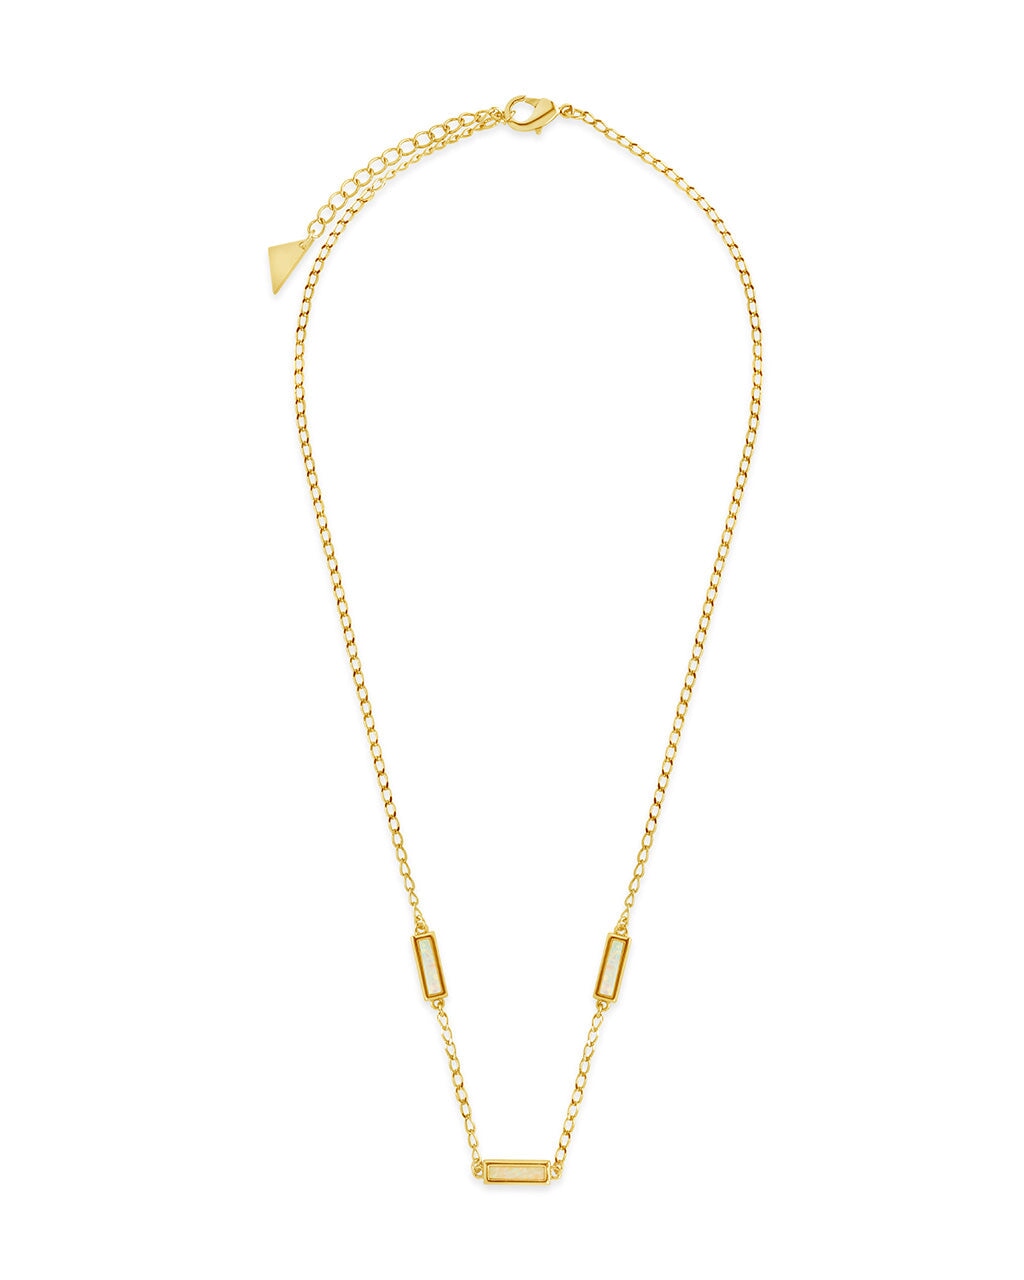 Pavati Necklace Necklace Sterling Forever 